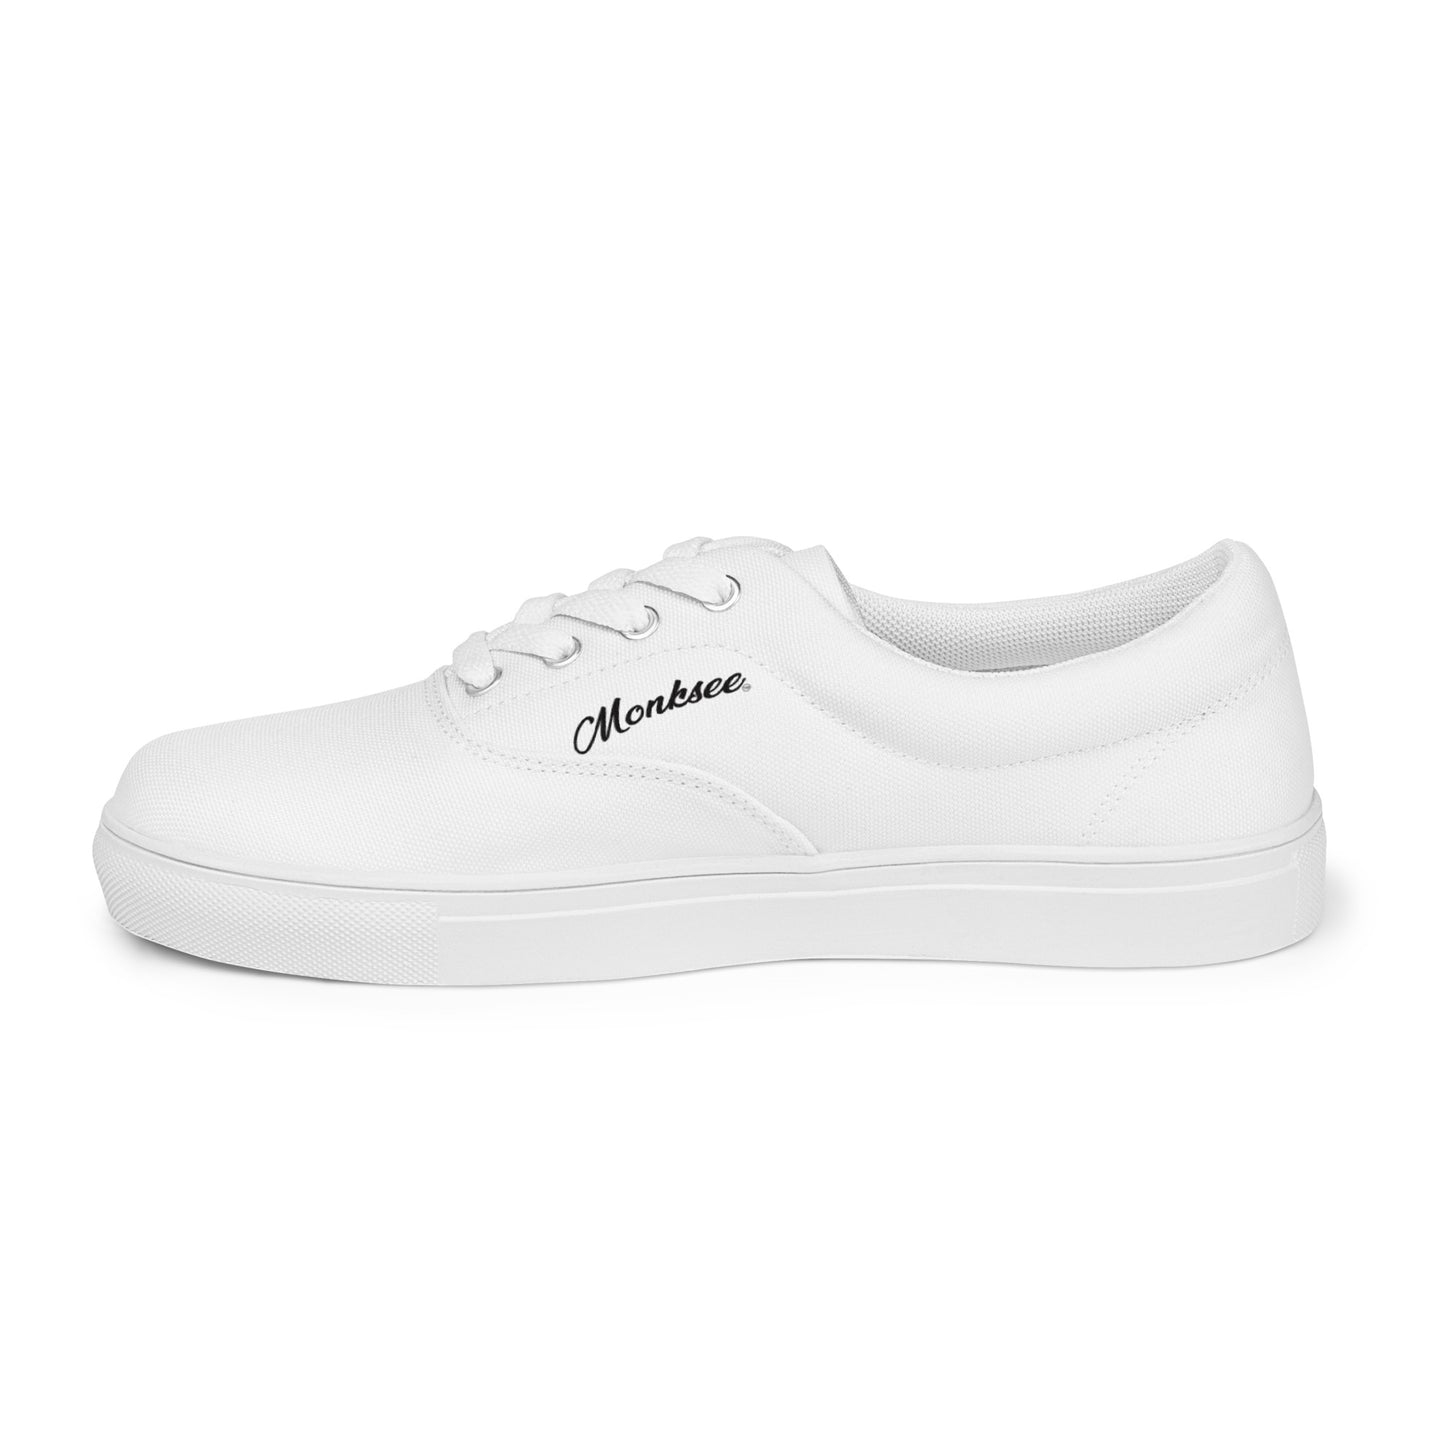 Stoked white - Men's Canvas shoes